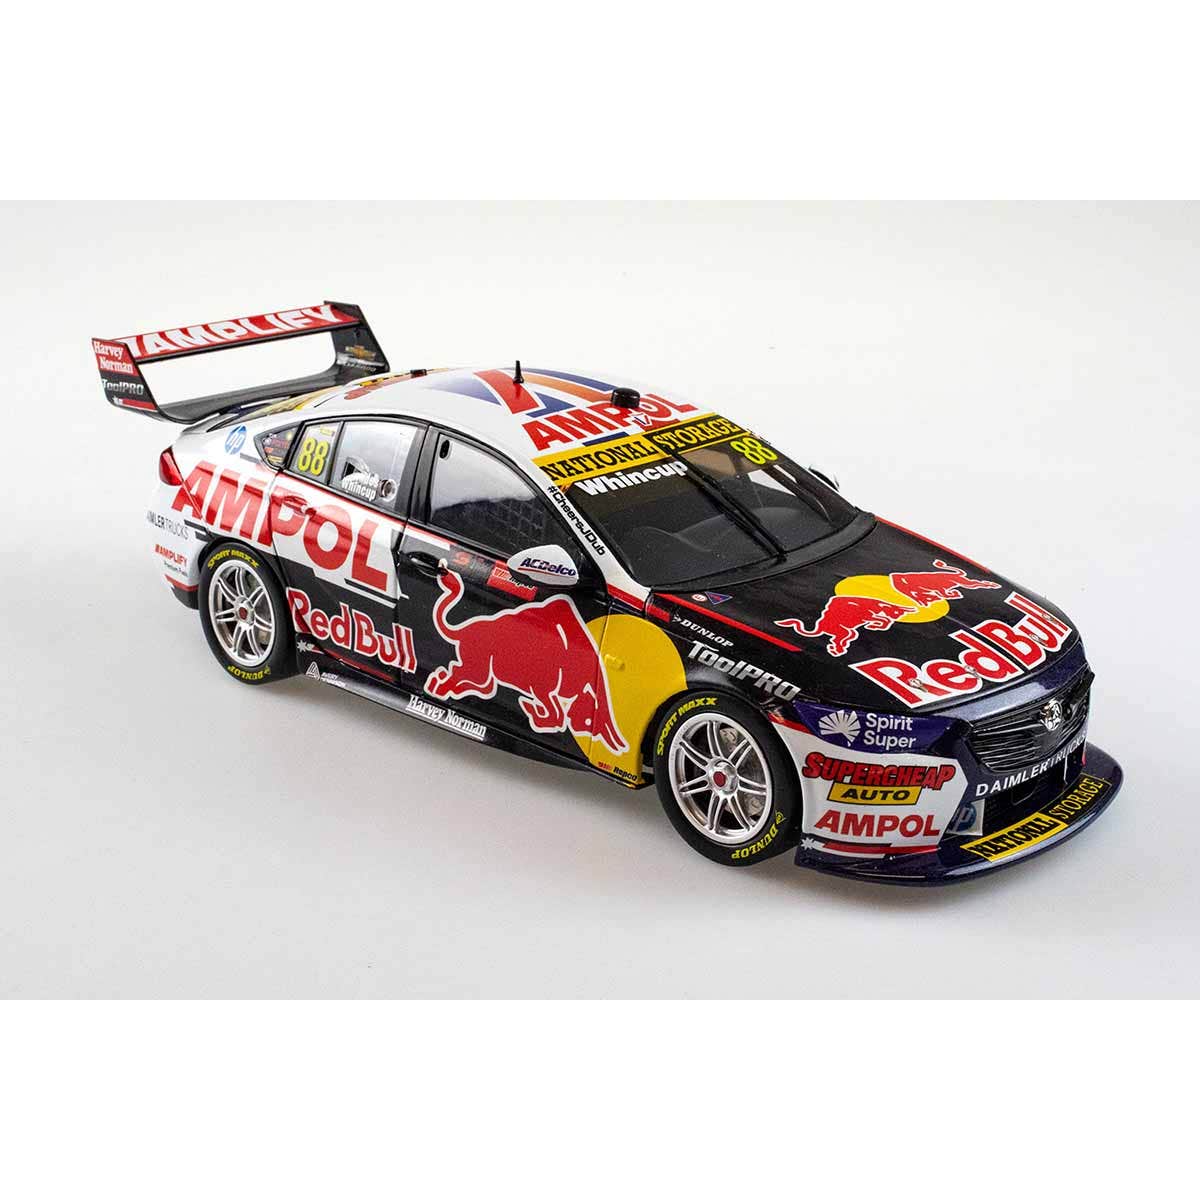 HOLDEN ZB COMMODORE - RED BULL AMPOL RACING - WHINCUP/LOWNDES #88 - REPCO Bathurst 1000 - 1:43 Scale Diecast Model Car